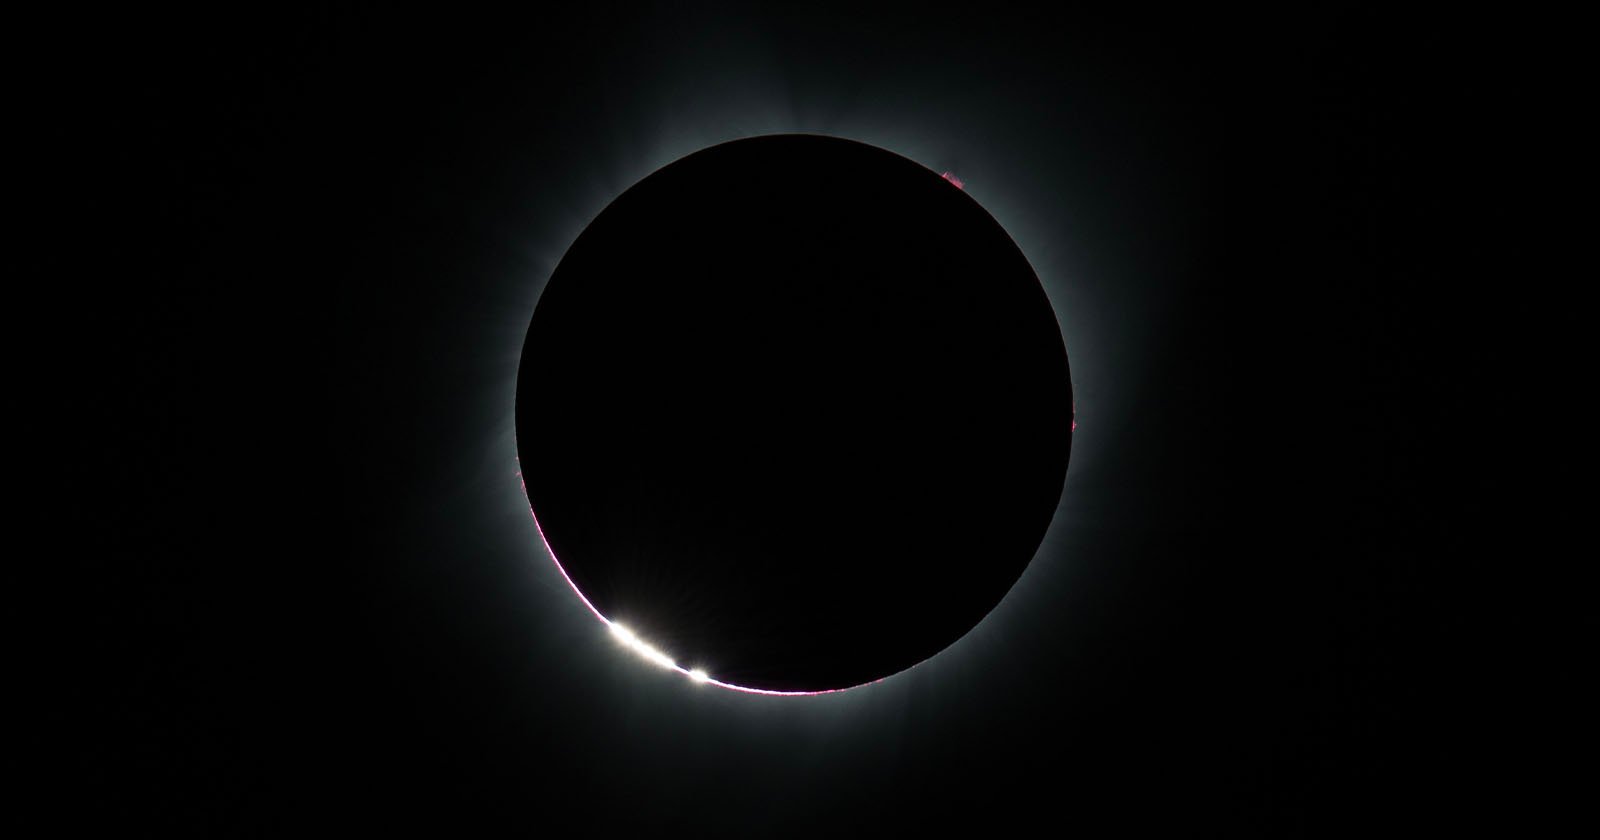 An solar eclipse with the Baily's beads phenomenon, where light rays peak out at the edge, is shown.